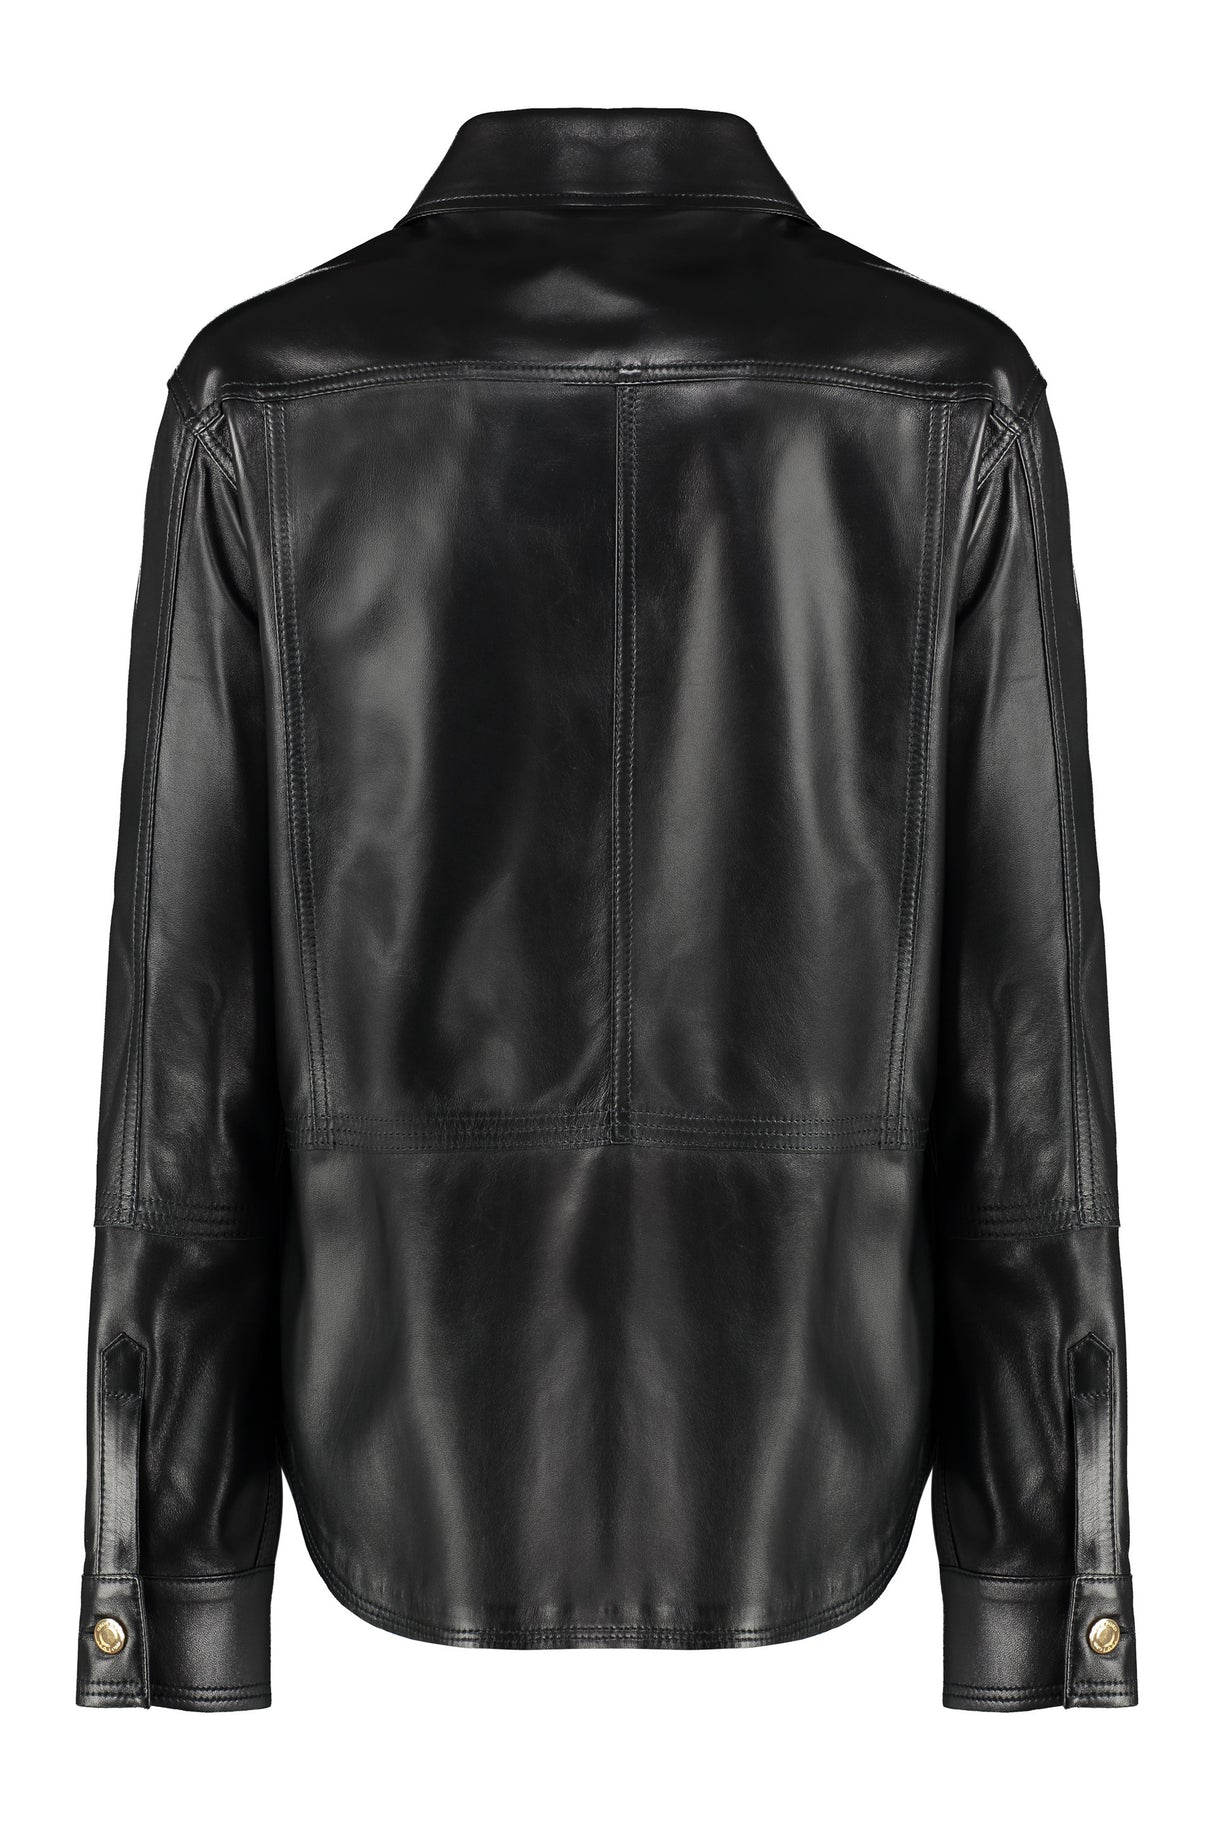 TOM FORD Black Leather Overshirt for Women - SS23 Collection